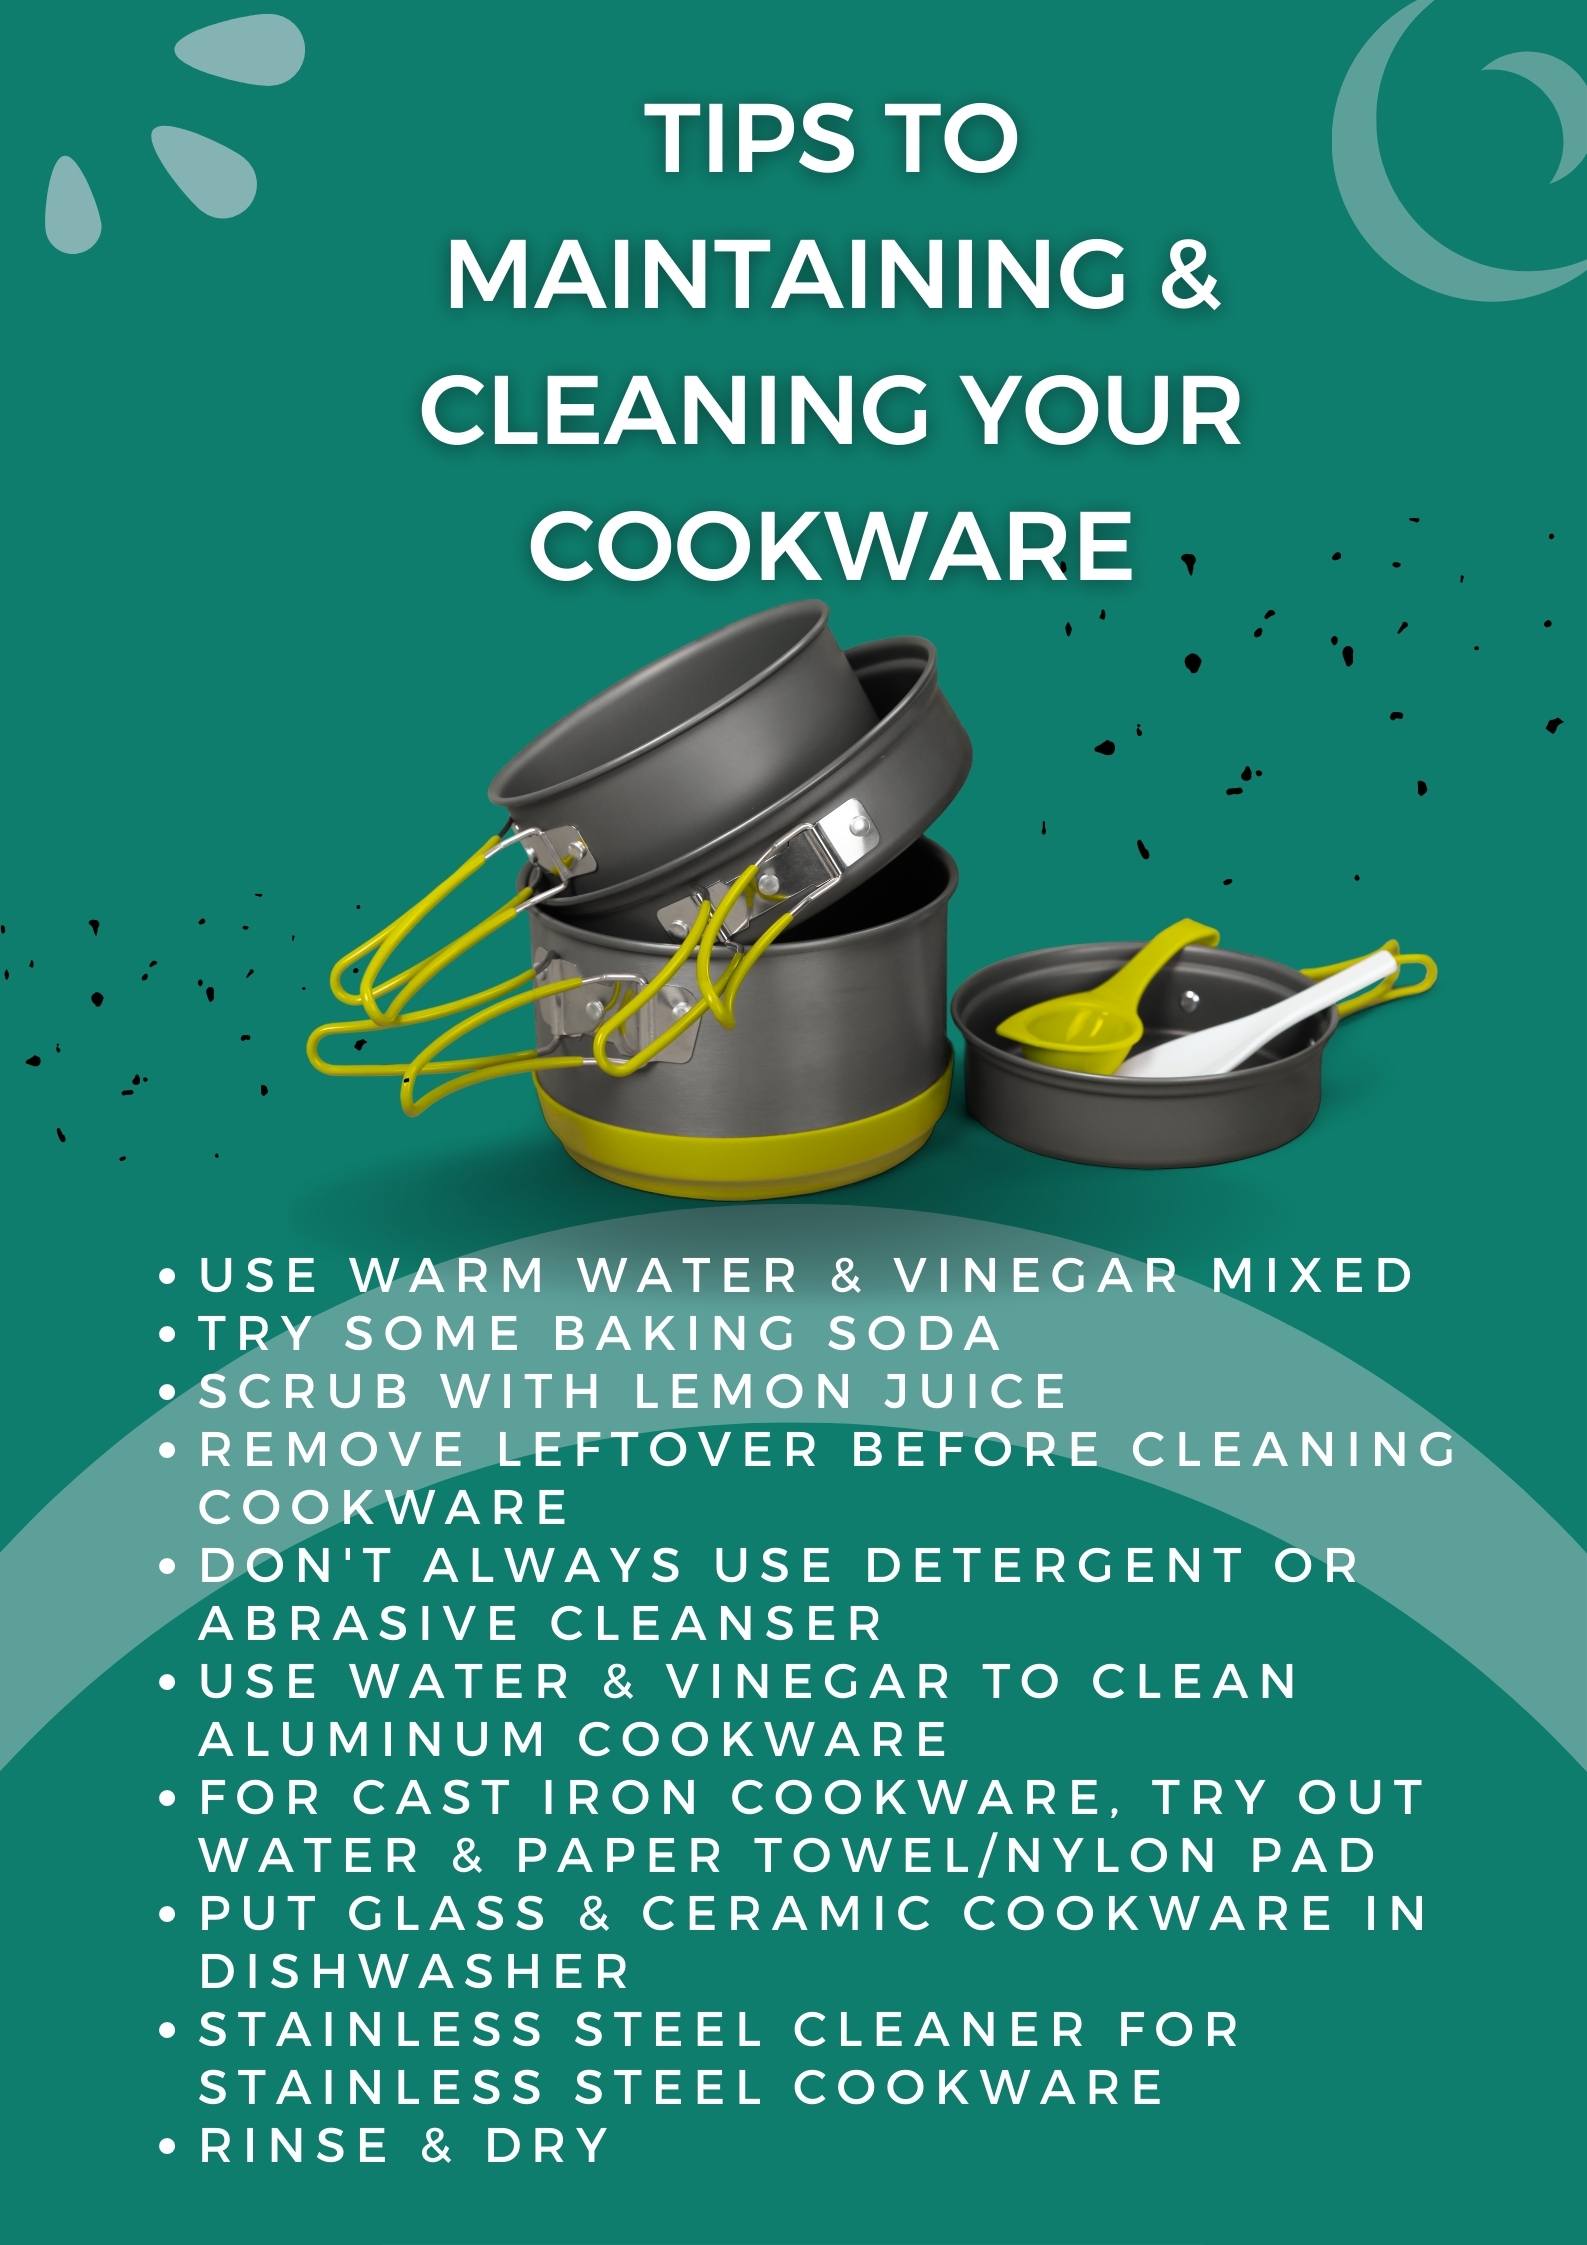 Tips to Maintaining & Cleaning Your Cookware